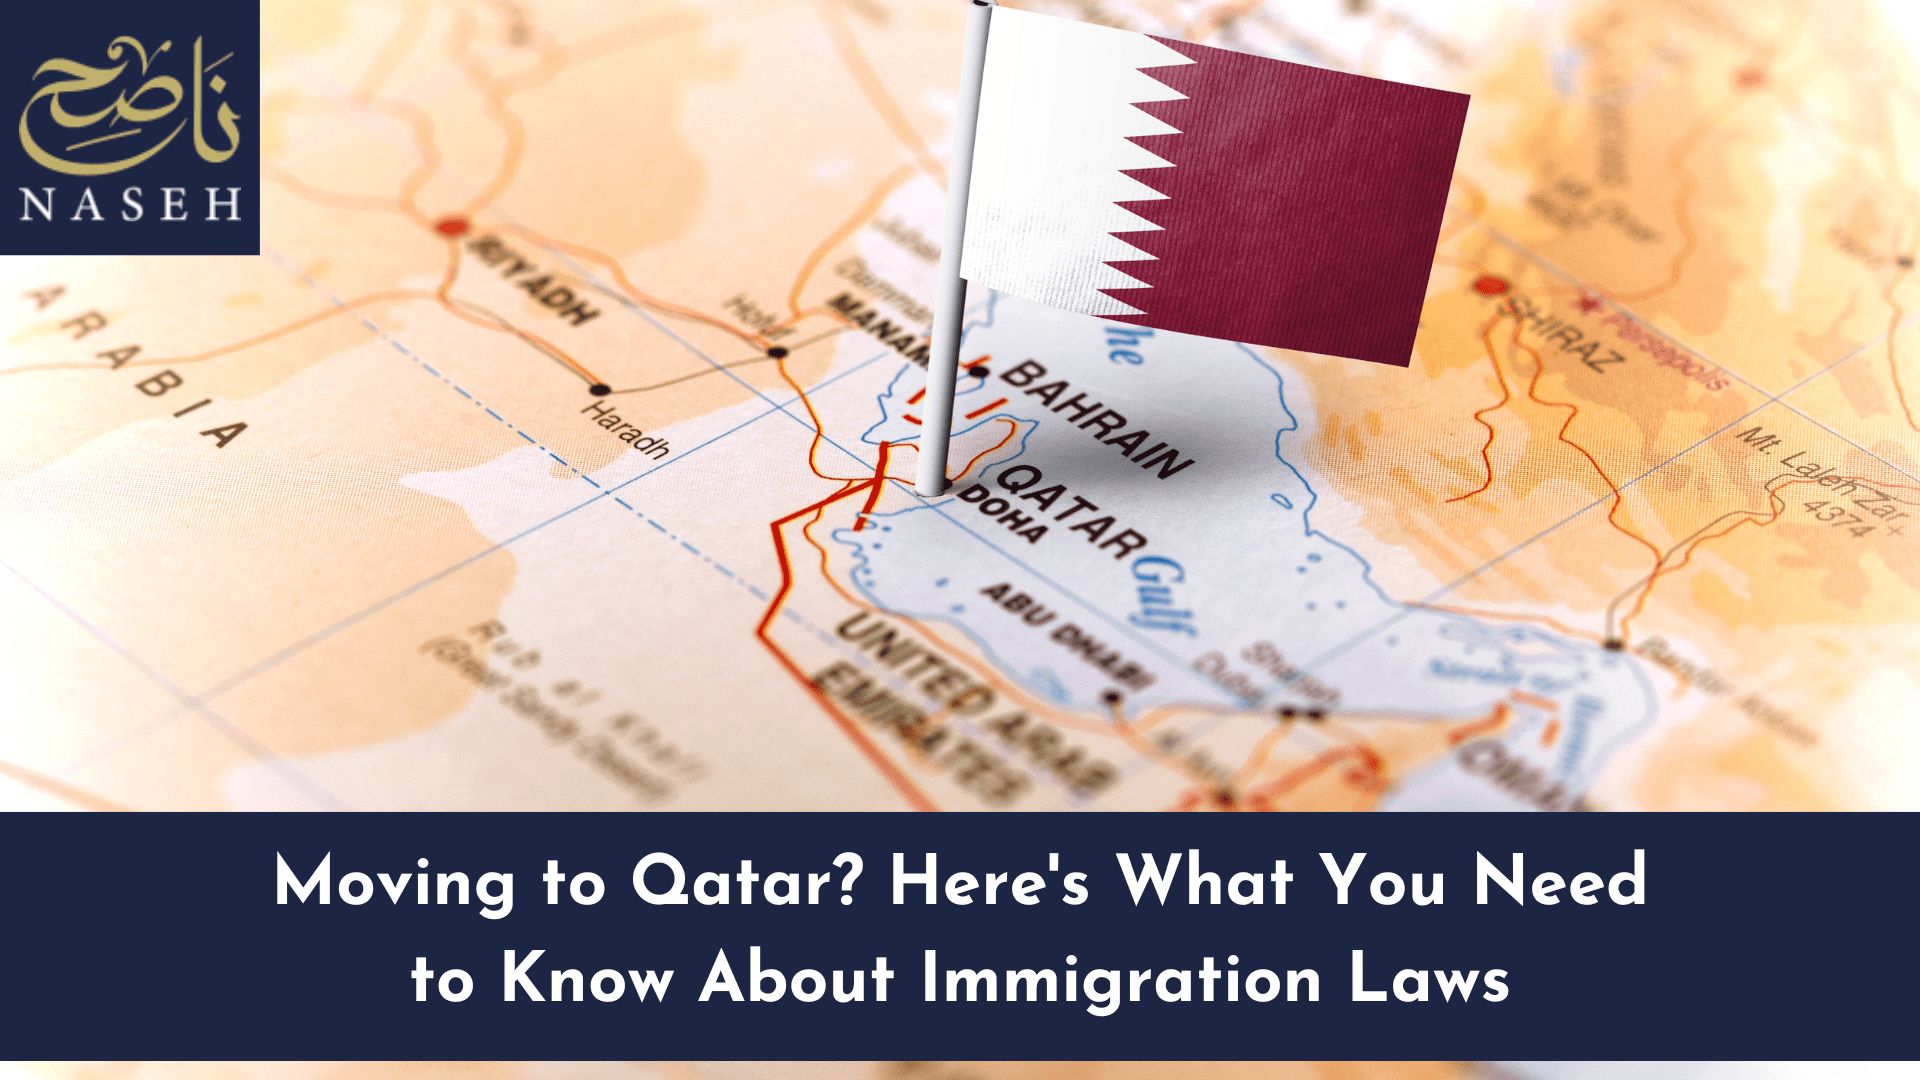 Moving to Qatar? Here's What You Need to Know About Immigration Laws